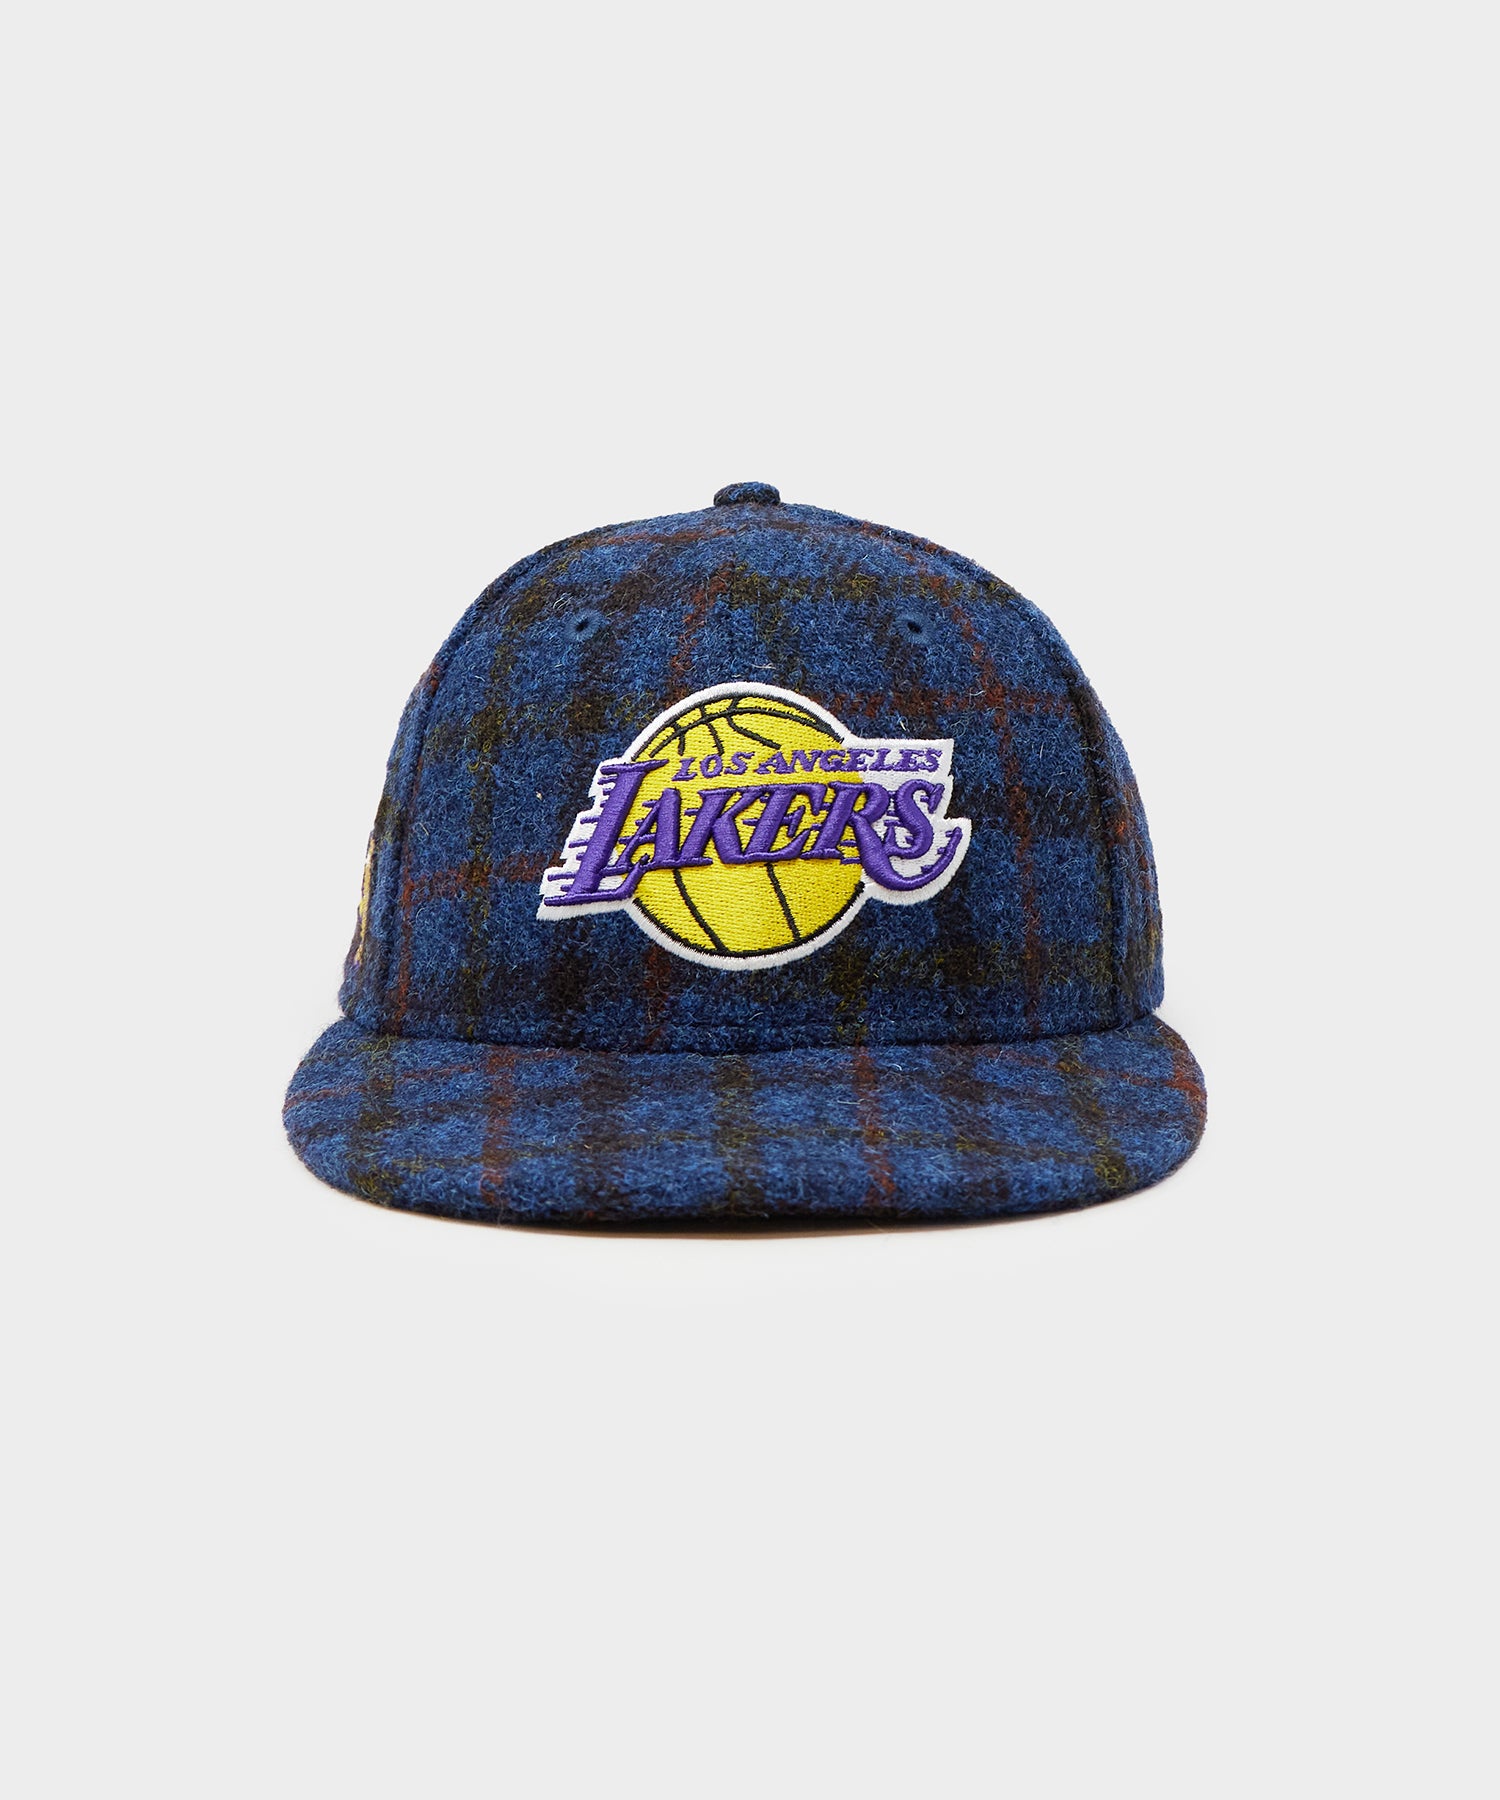 Authentic New Era Los Angeles Lakers Sport Knit Beanie Cold Weather Hat